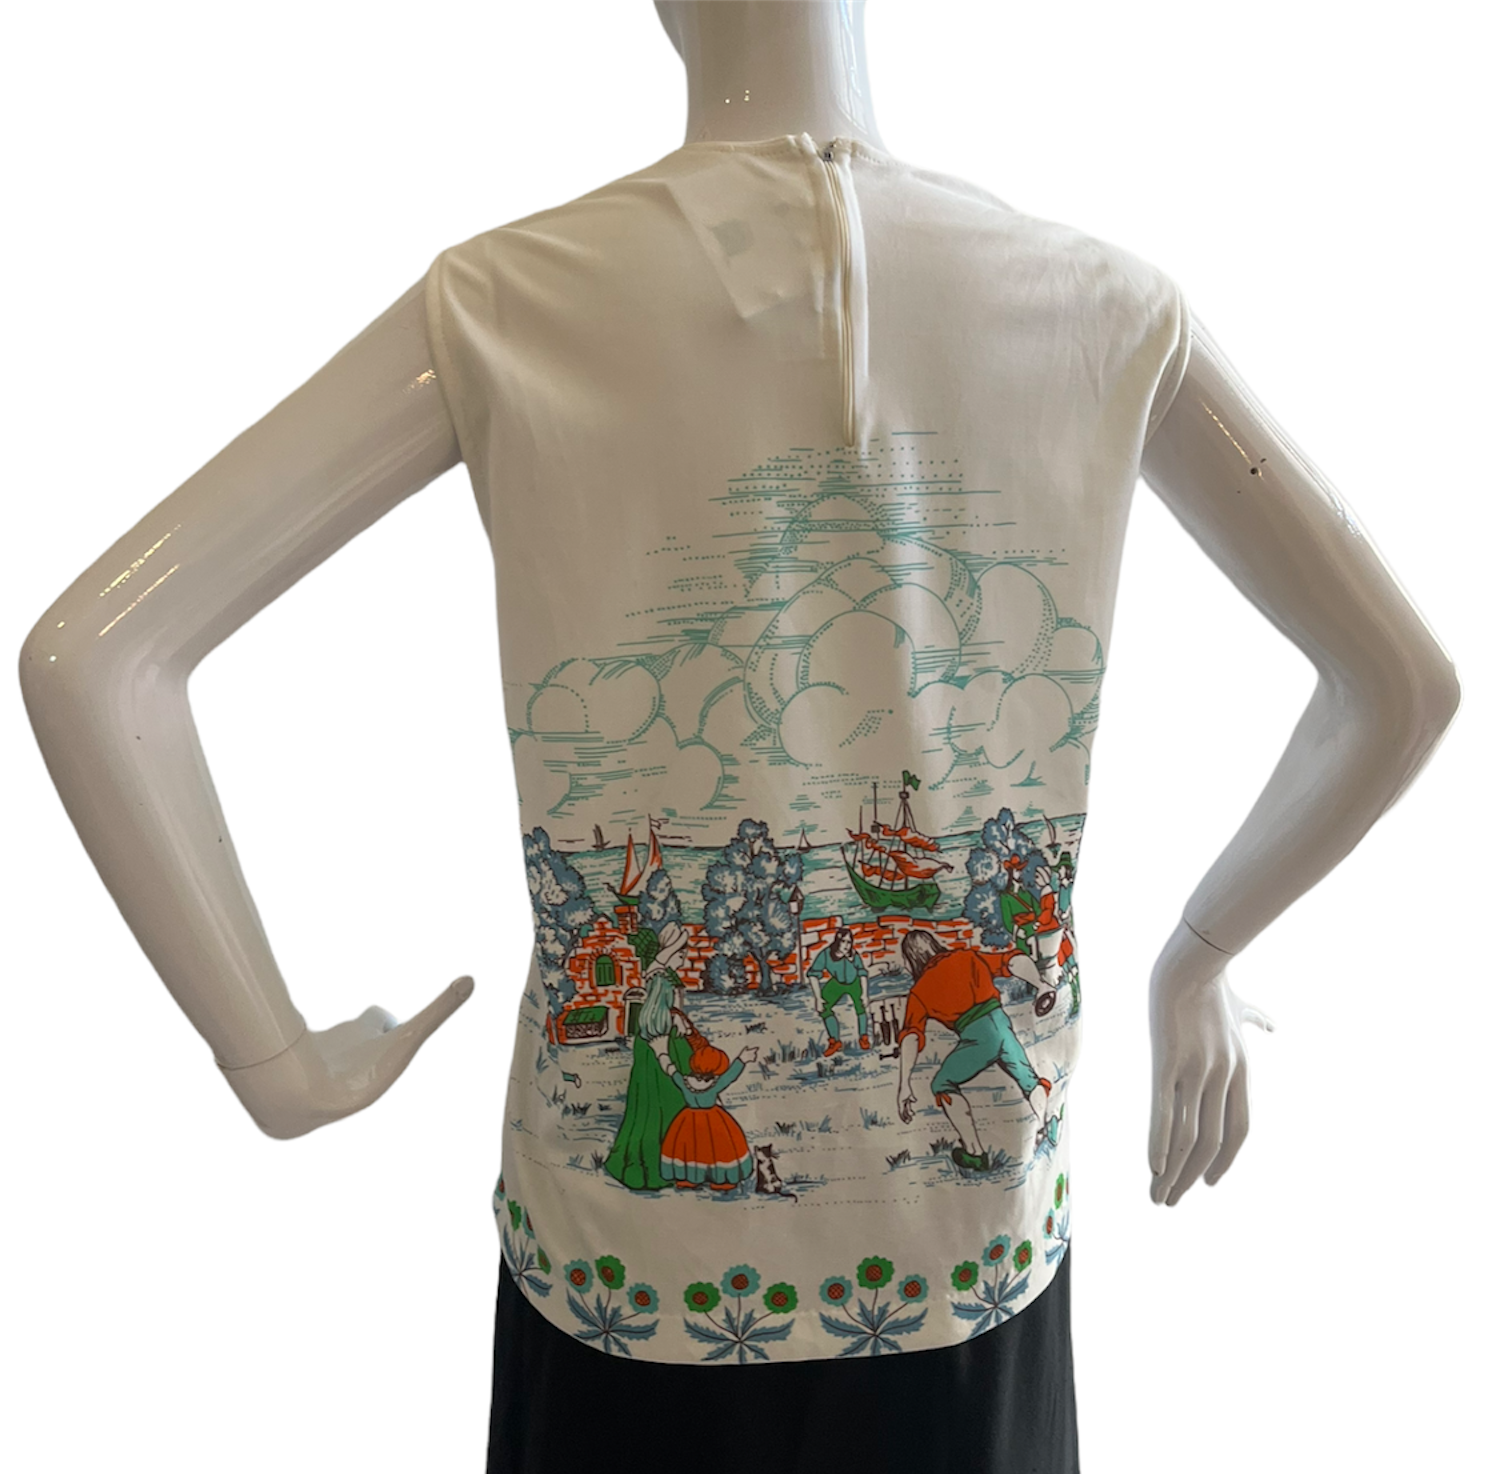 60s Mod Novelty 'Bowling' Top